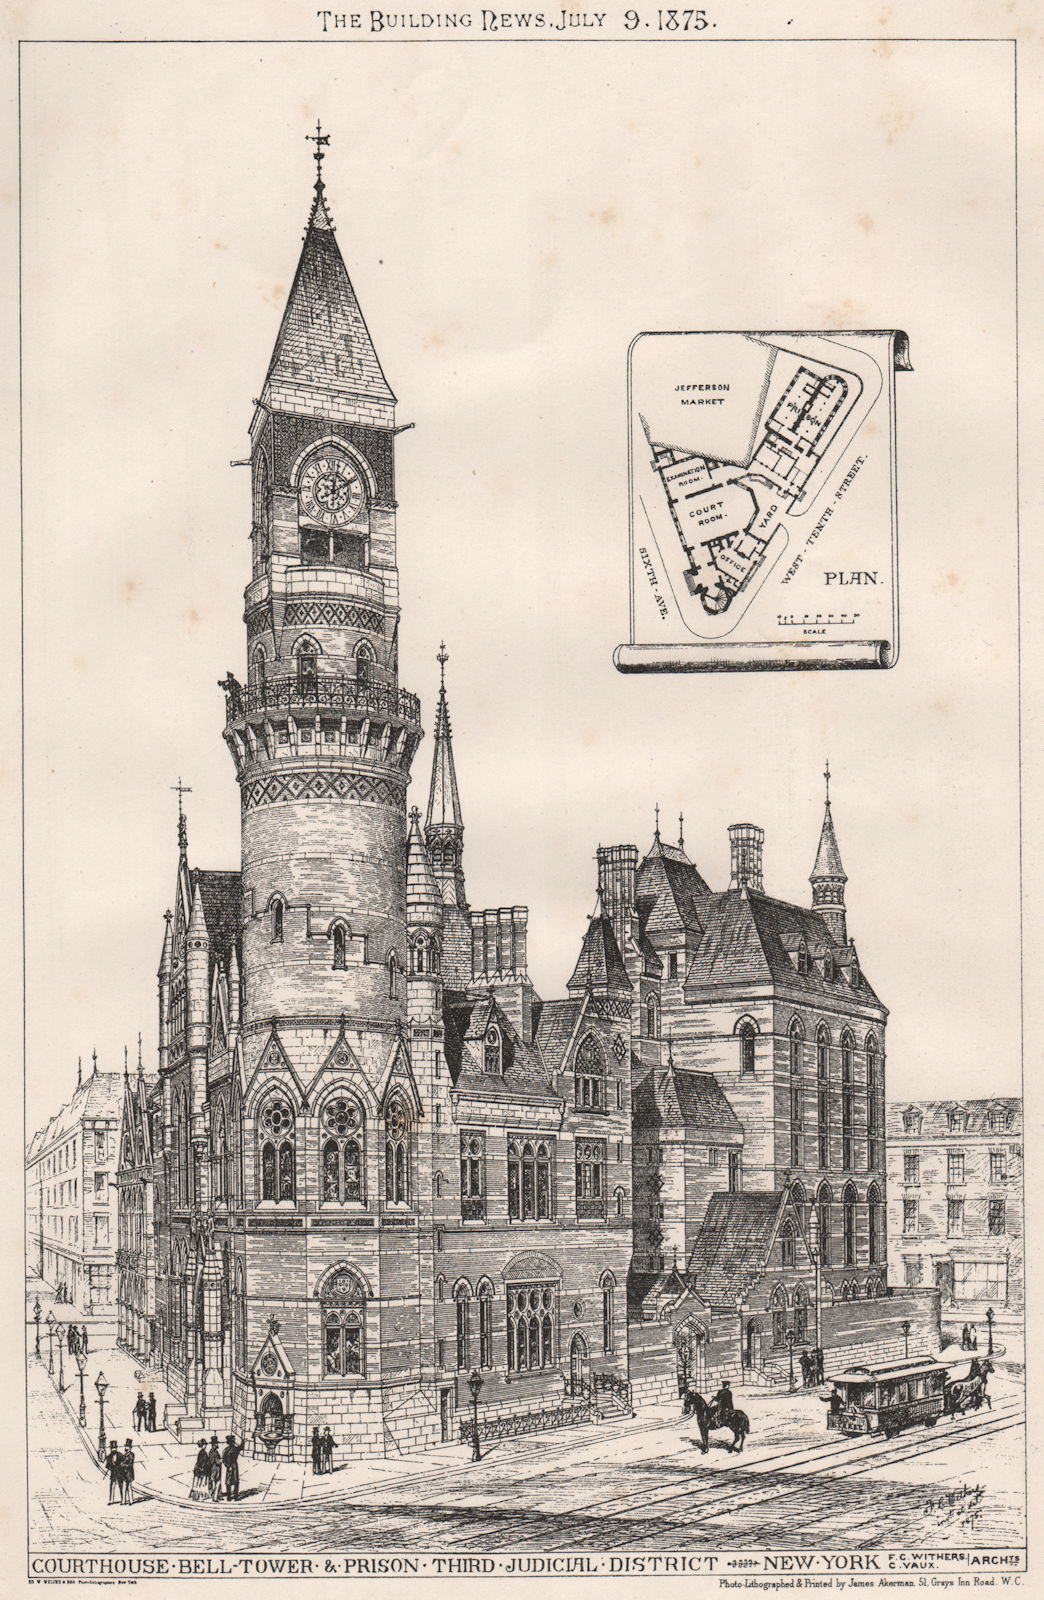 Associate Product Courthouse, bell tower & prison; Third Judicial District, New York 1875 print